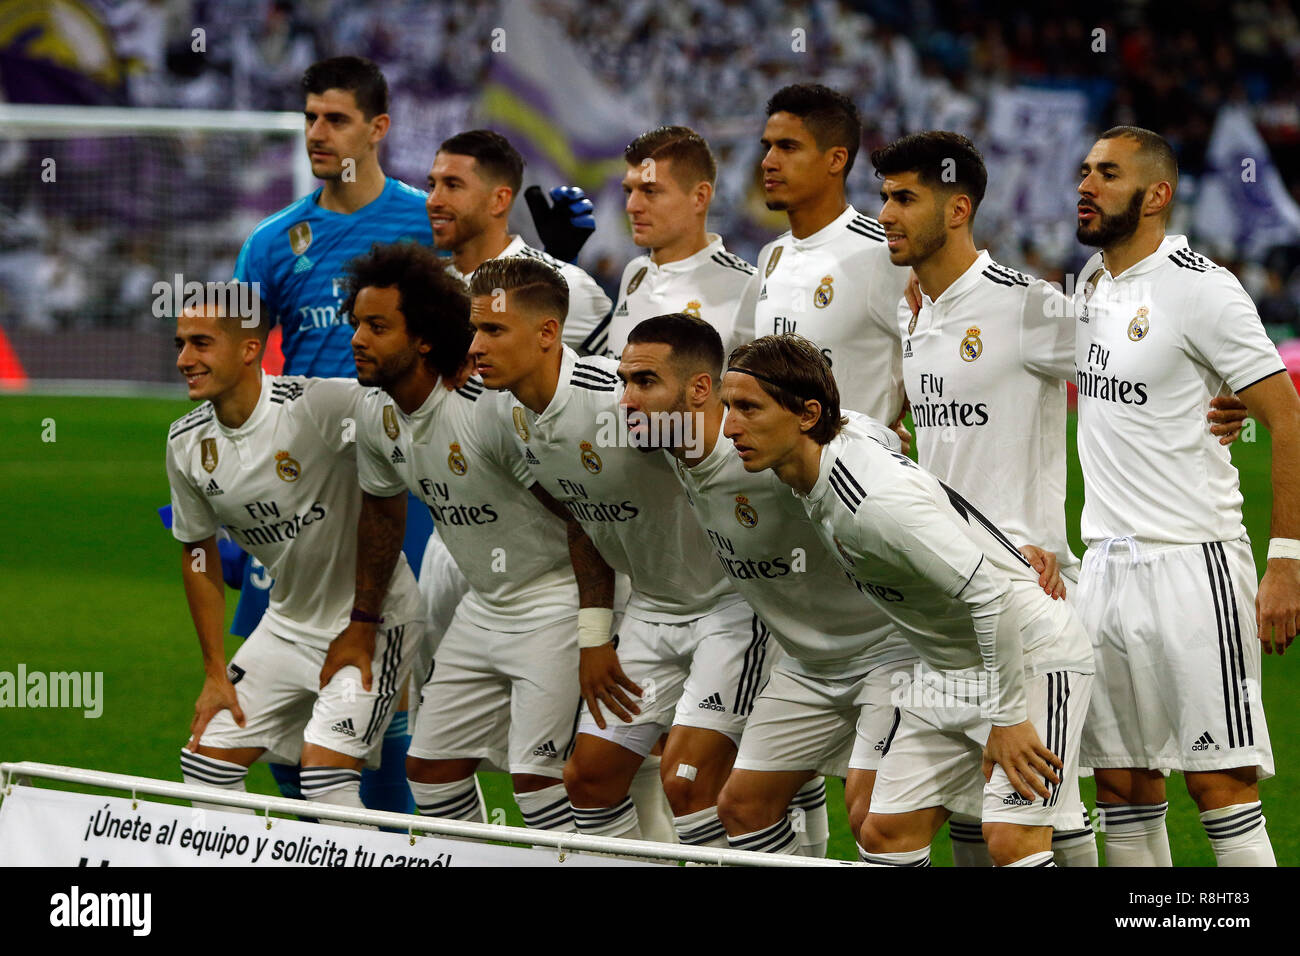 Real Madrid team seen posing for a photo before the La Liga football match between Real Madrid and Rayo Vallecano at the Estadio Santiago Bernabéu in Madrid. ( Final score; Real Madrid 1:0 Rayo Vallecano ) Stock Photo